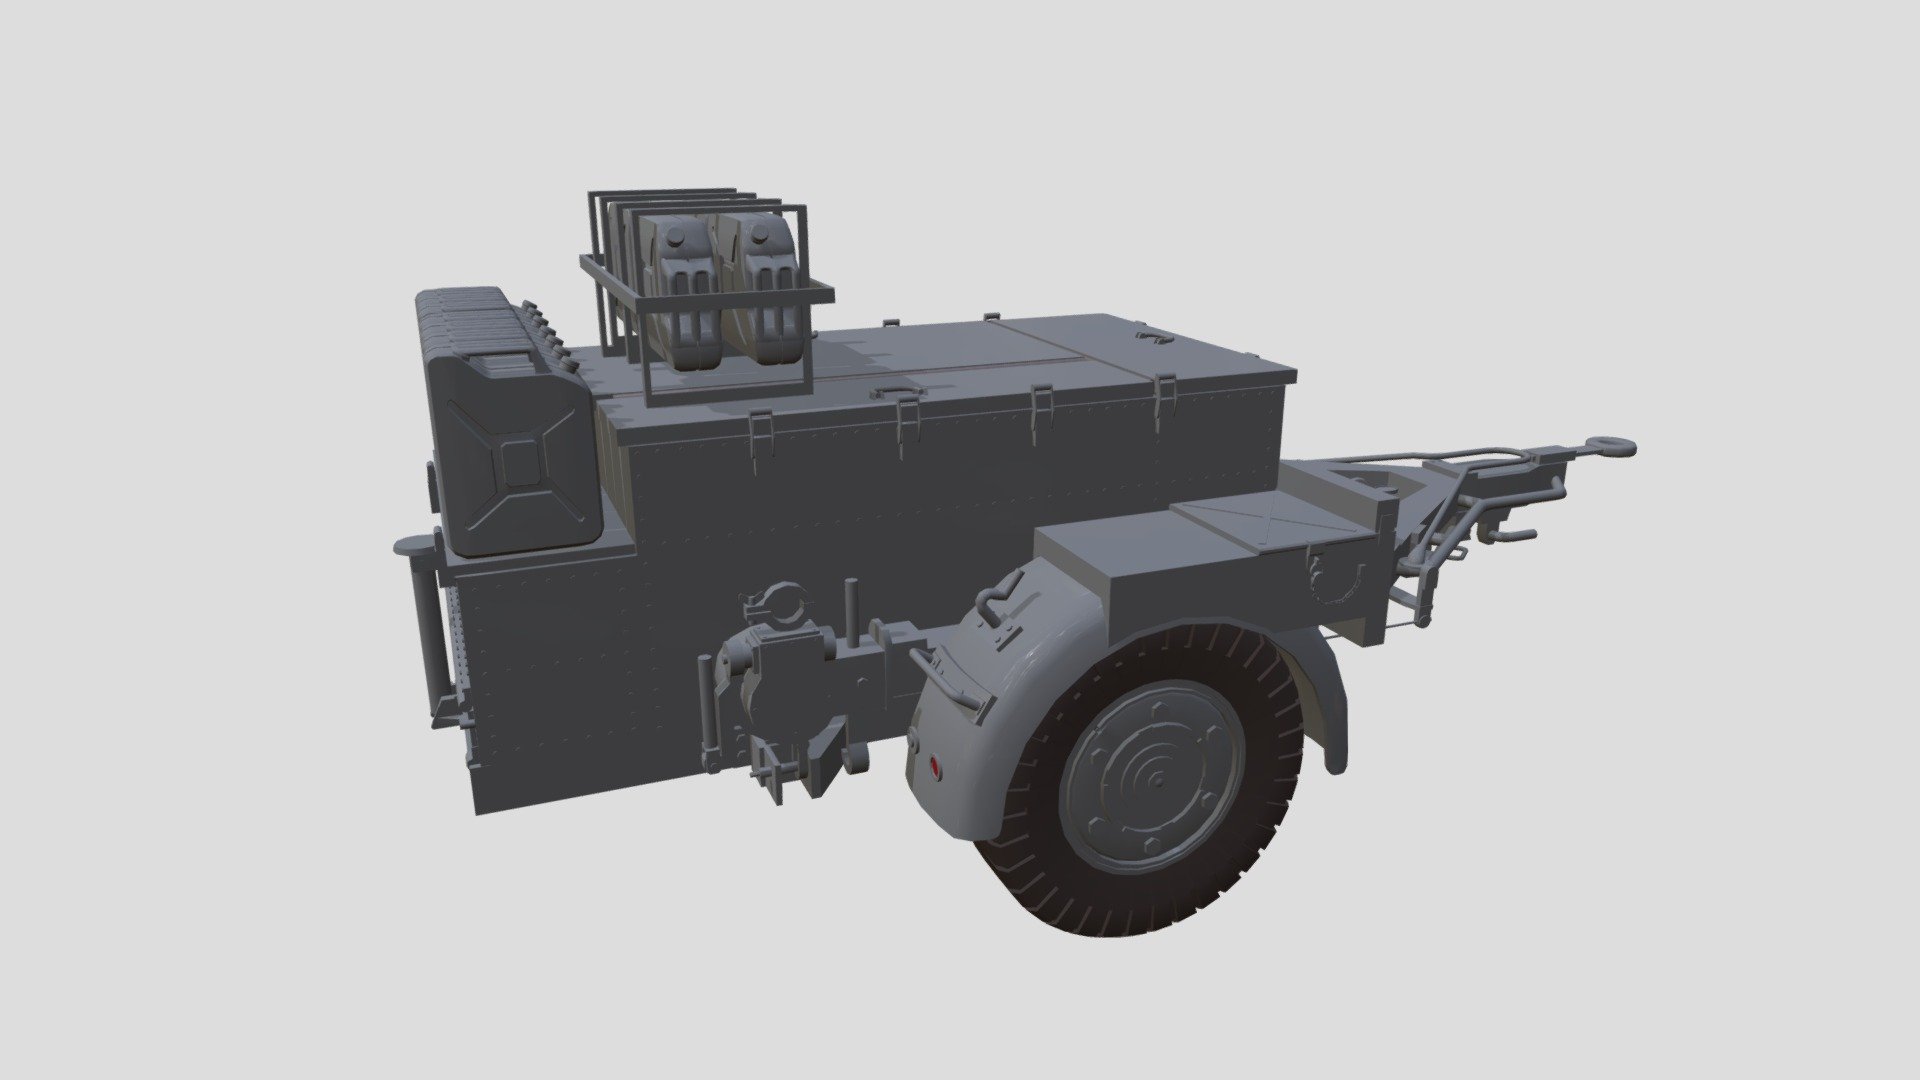 Sd.AH.52 37mm Flak 36/37 Ammunition Carriage Trailor.
* The file is only for animation, cannot print the actual finished product.

二戰德國Flak 36/37彈藥載運拖車。*作品僅供動畫使用，無法以3D列印出實際成品。 - Sd.AH52 Ammunition Carriage Trailor - Download Free 3D model by Basic Hsu (@Hsu.Pei.Ge) 3d model